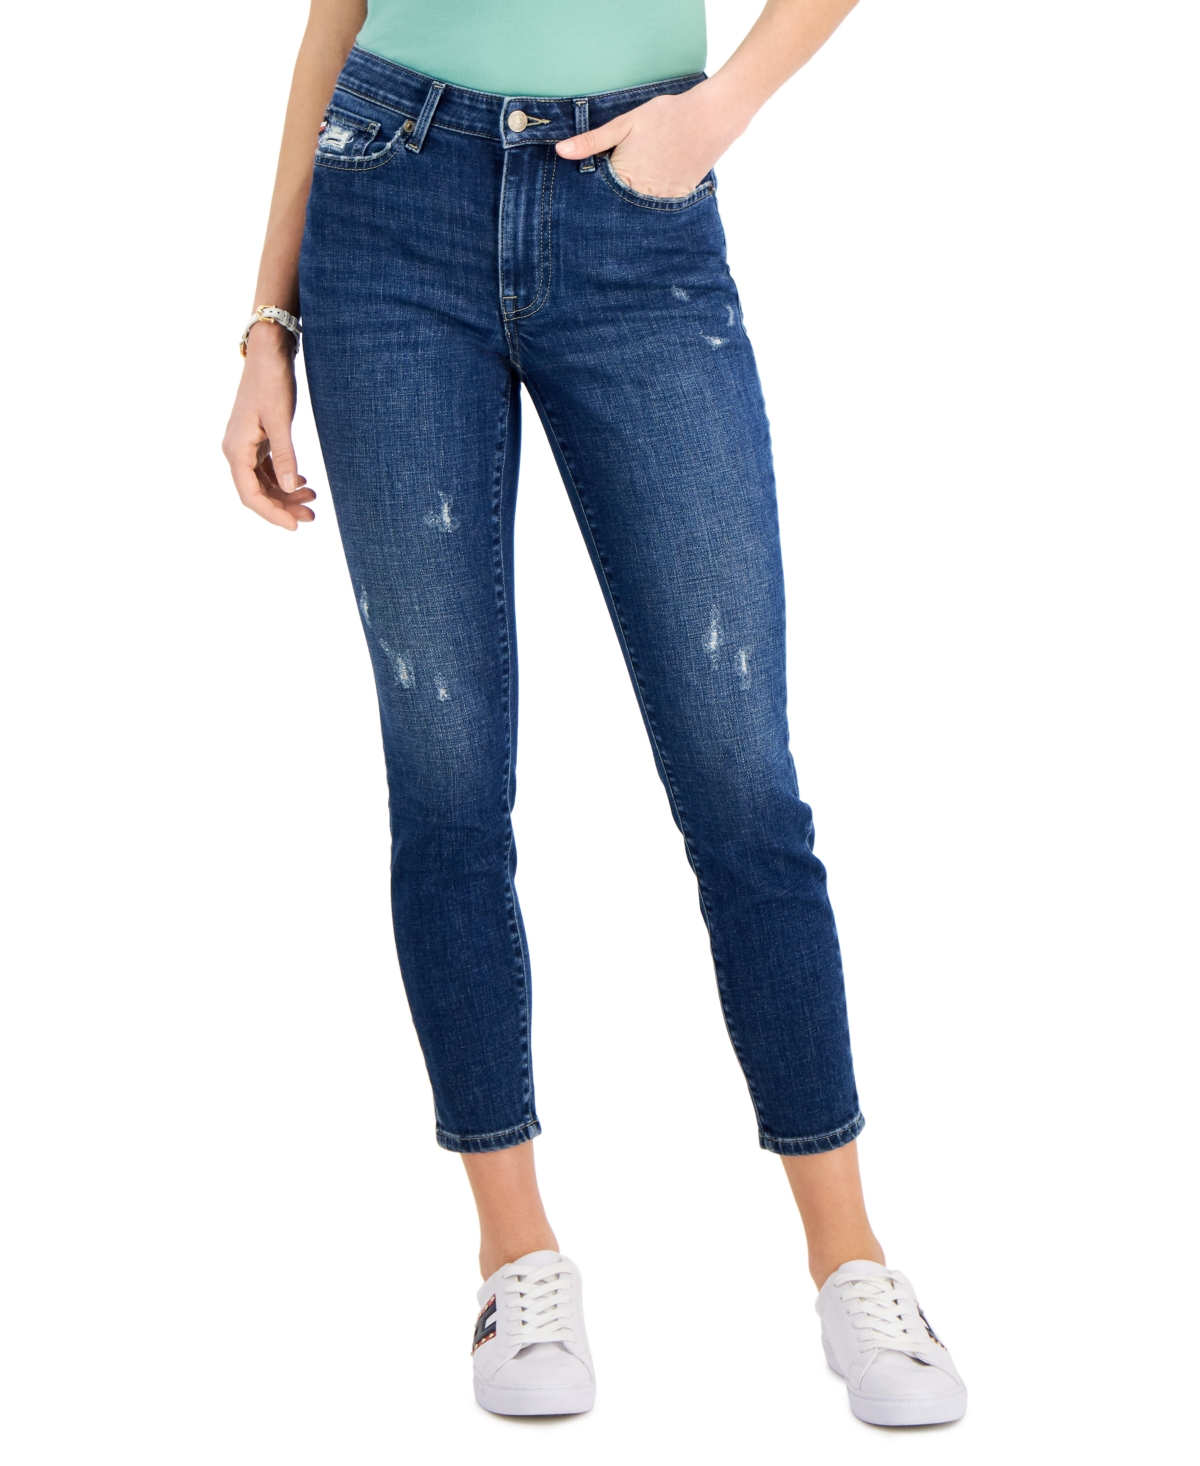 Tommy Hilfiger Th Flex Curvy Fit Distressed Skinny Ankle Jeans